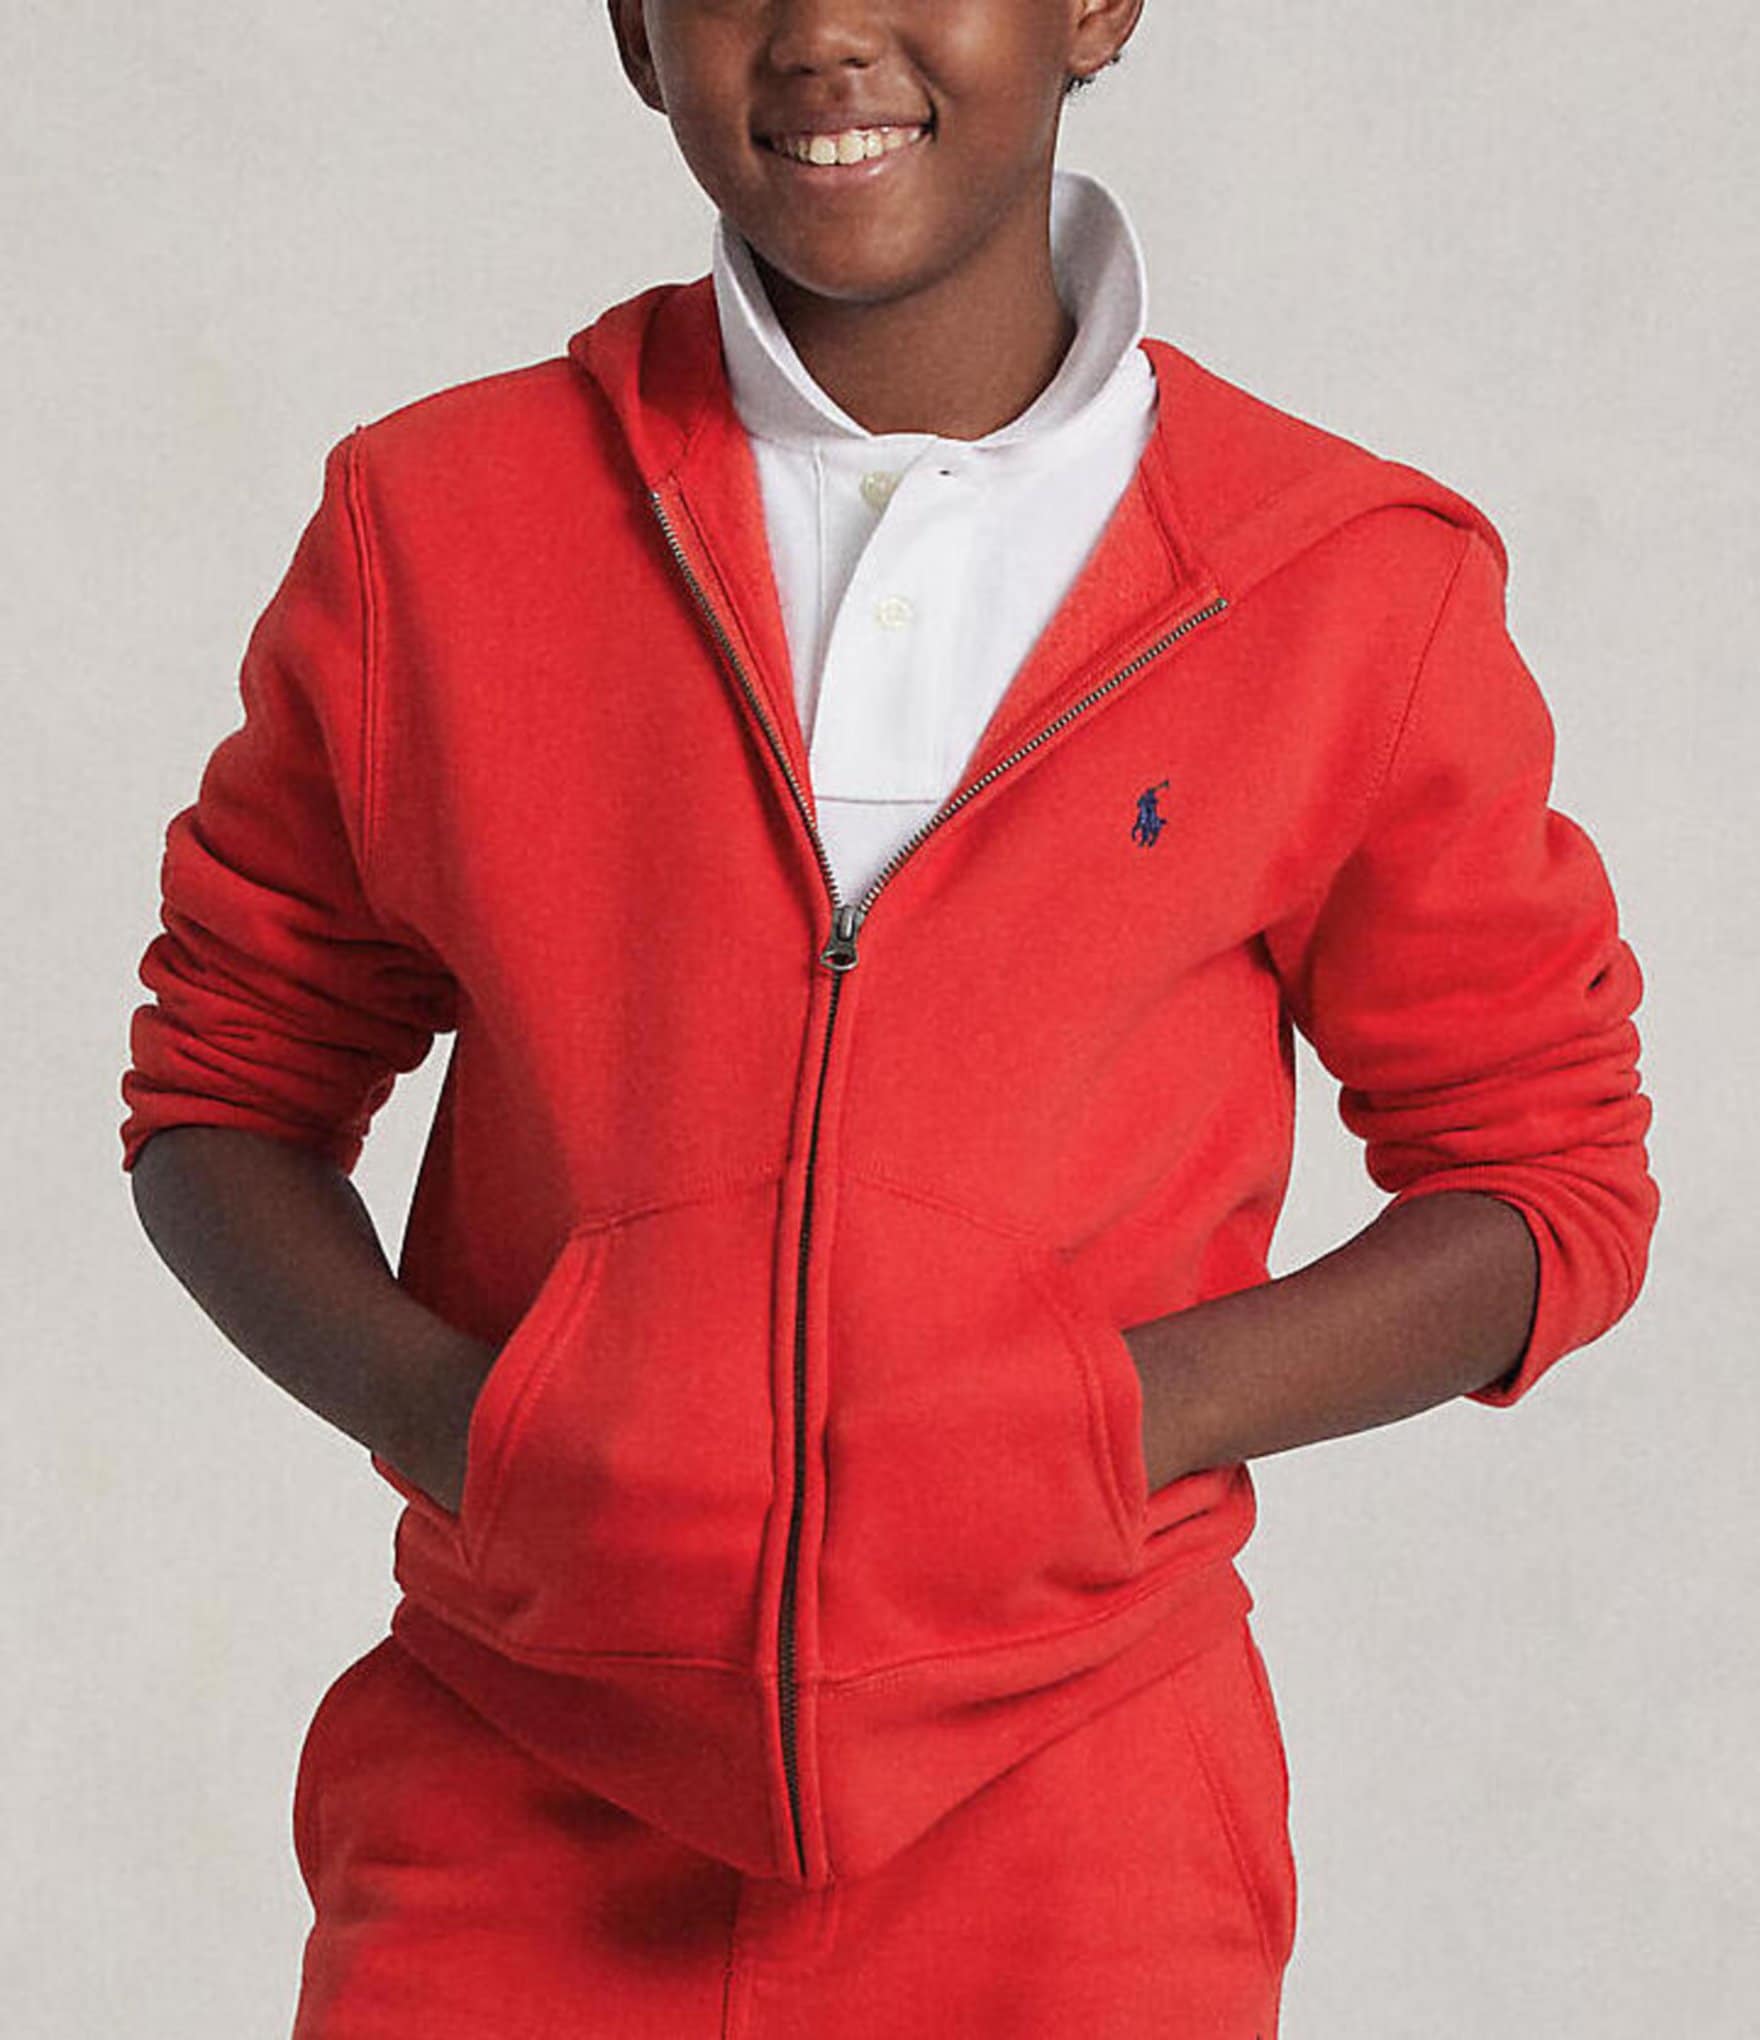 Buy > red zip up polo hoodie > in stock